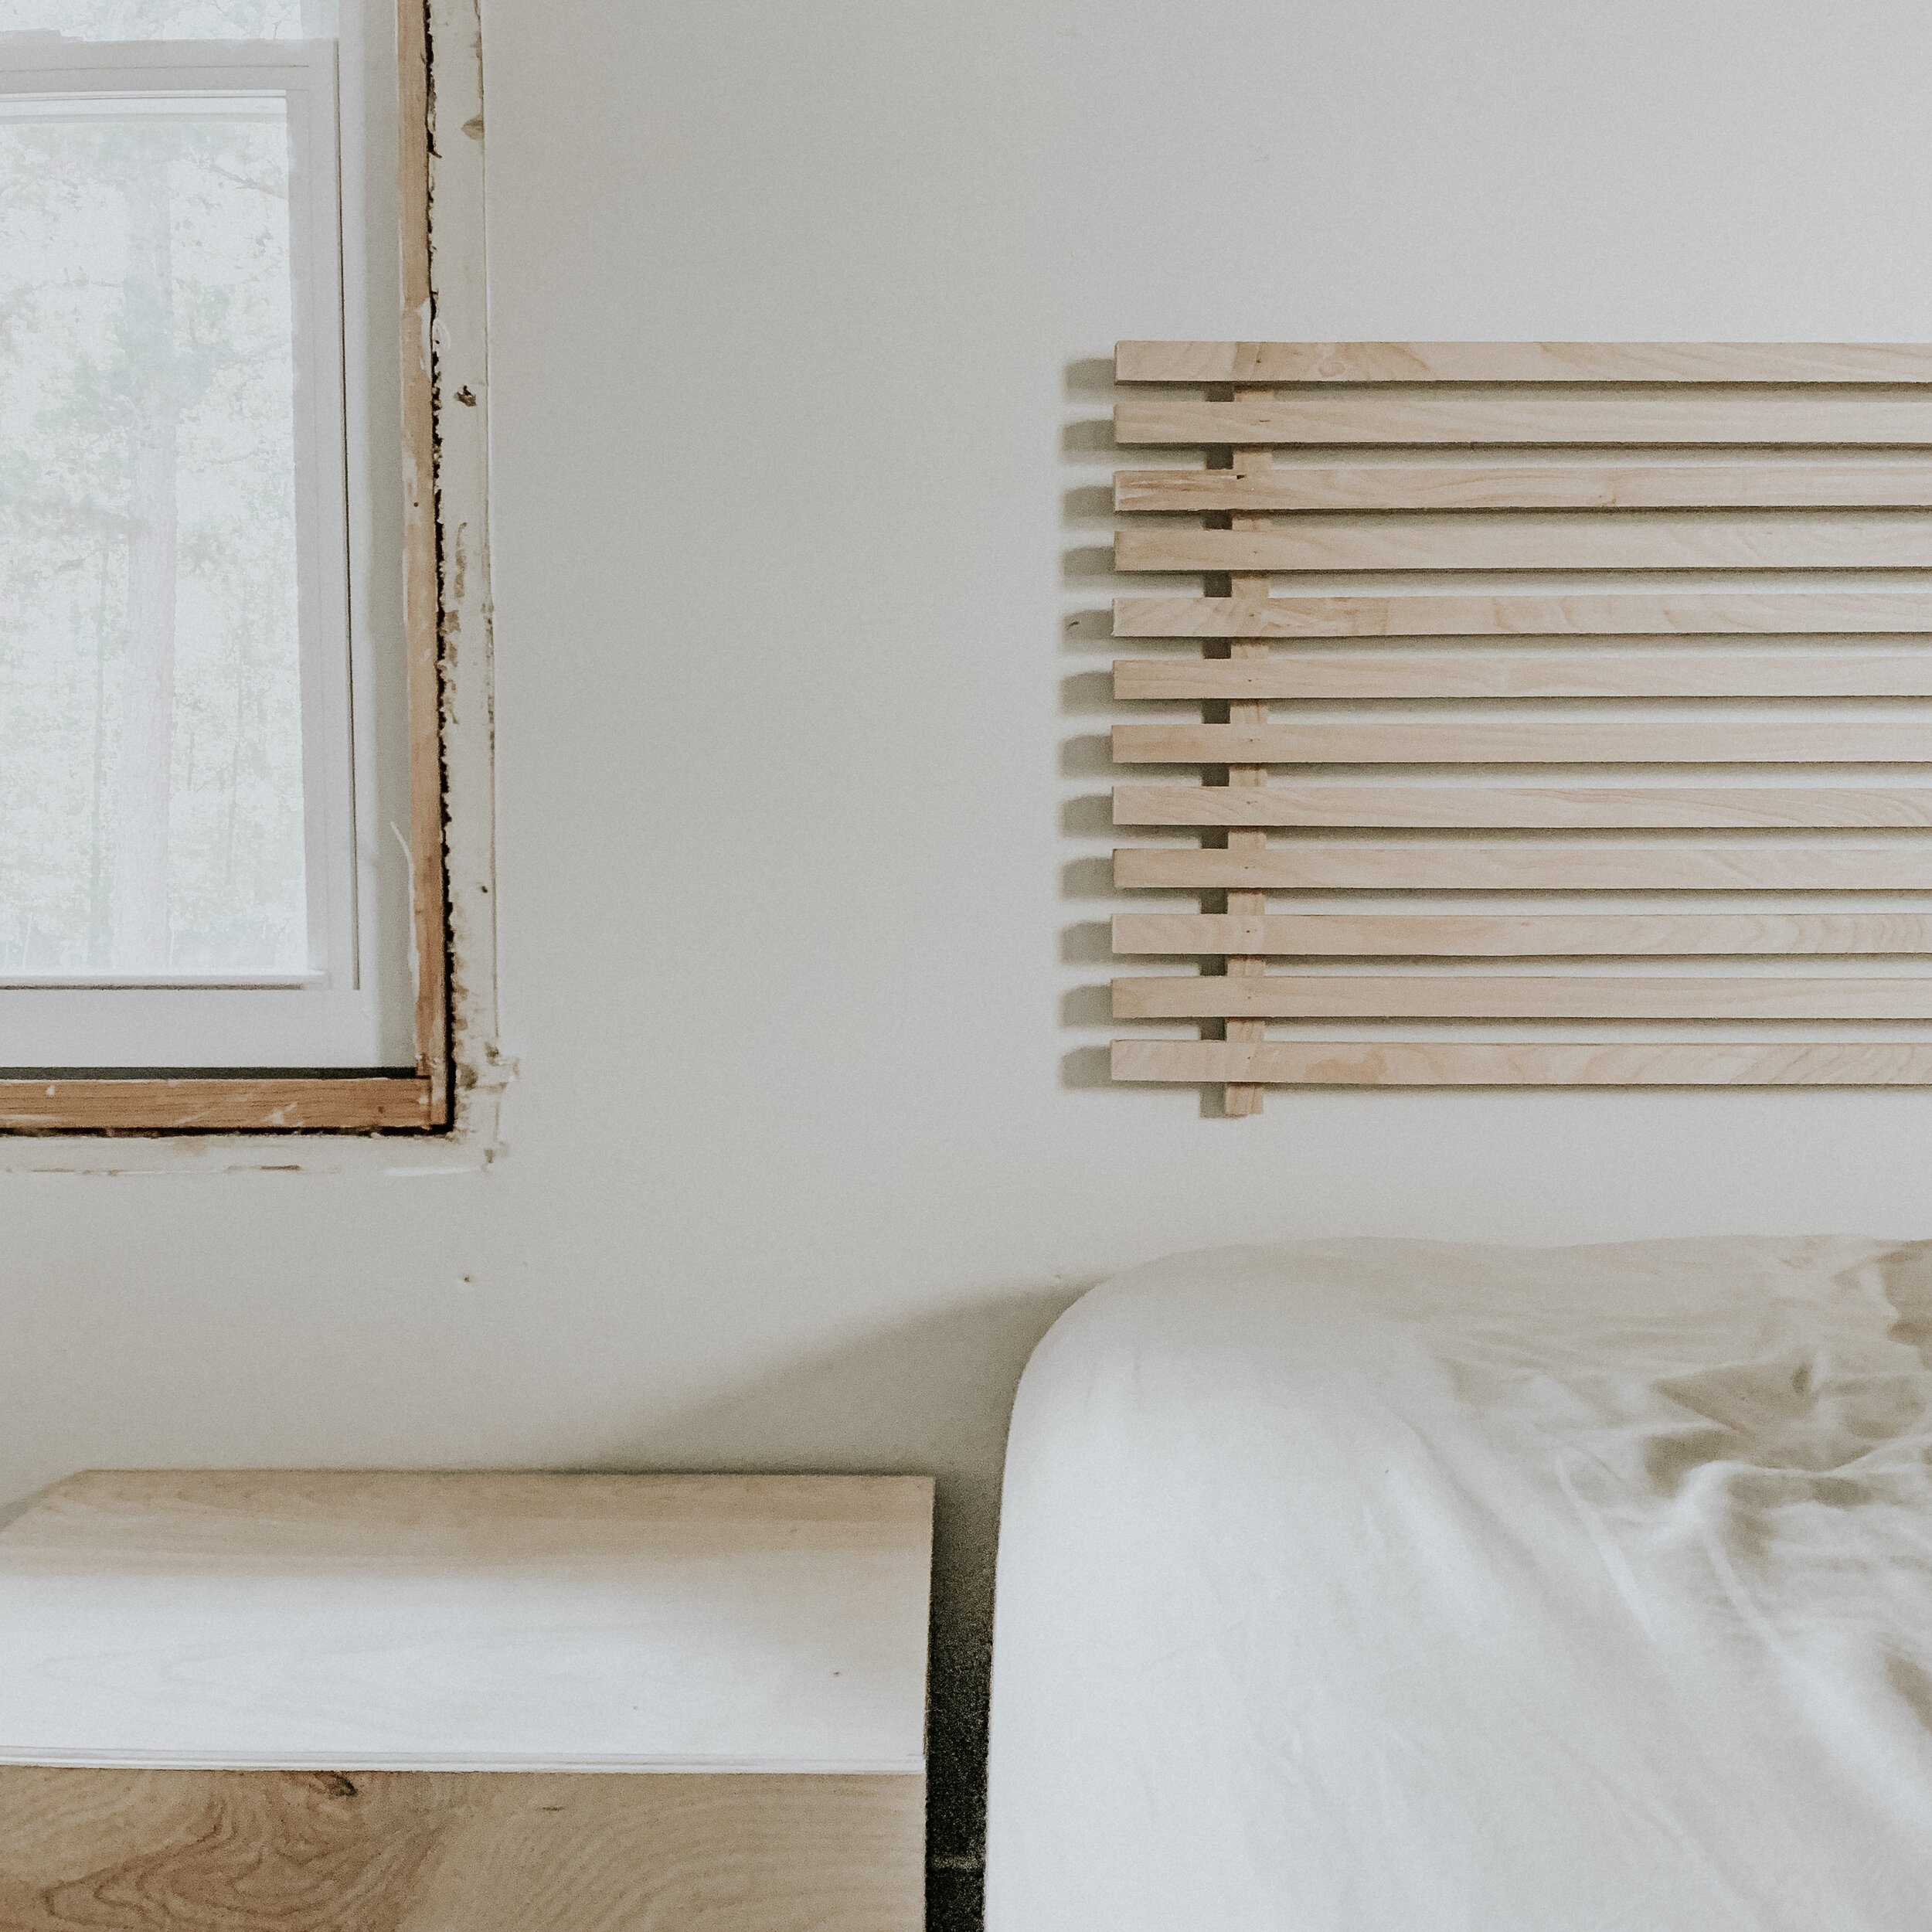 This Minimal House Diy Minimalism, How To Make A Wooden Slat Bed Frame